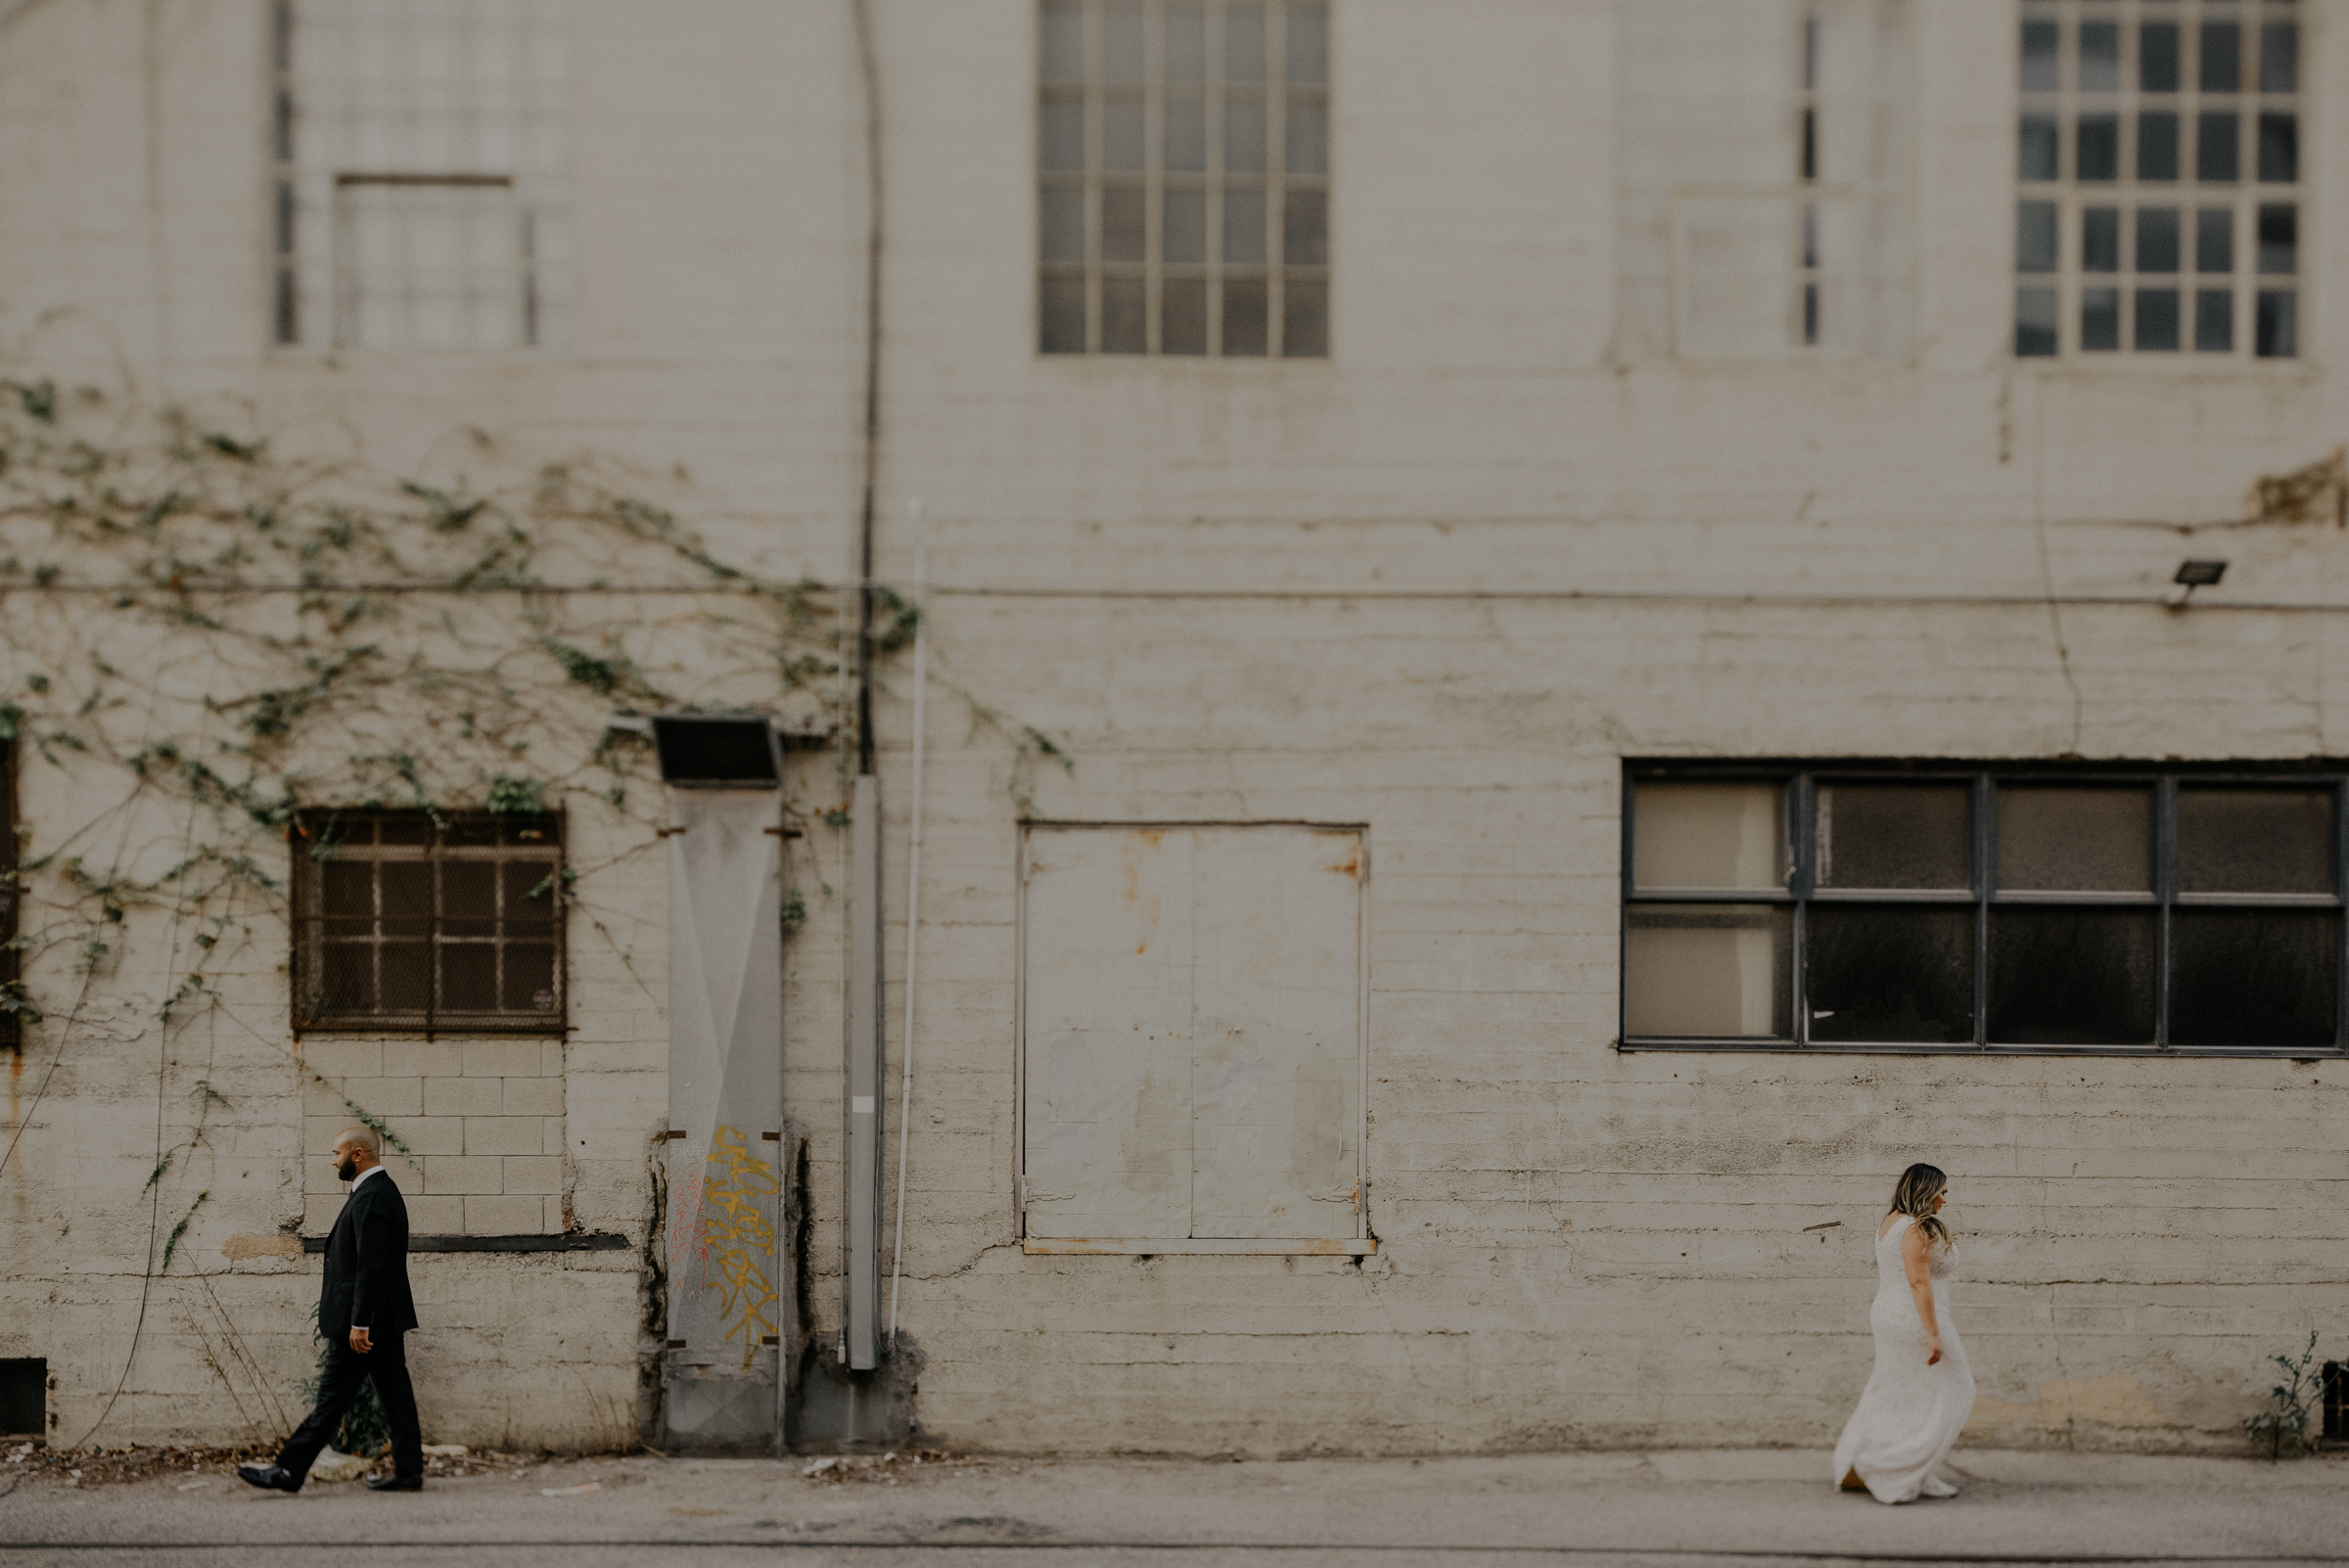 Isaiah + Taylor Photography - Los Angeles Wedding Photographer - DTLA Arts District  Engagement Session  019.jpg